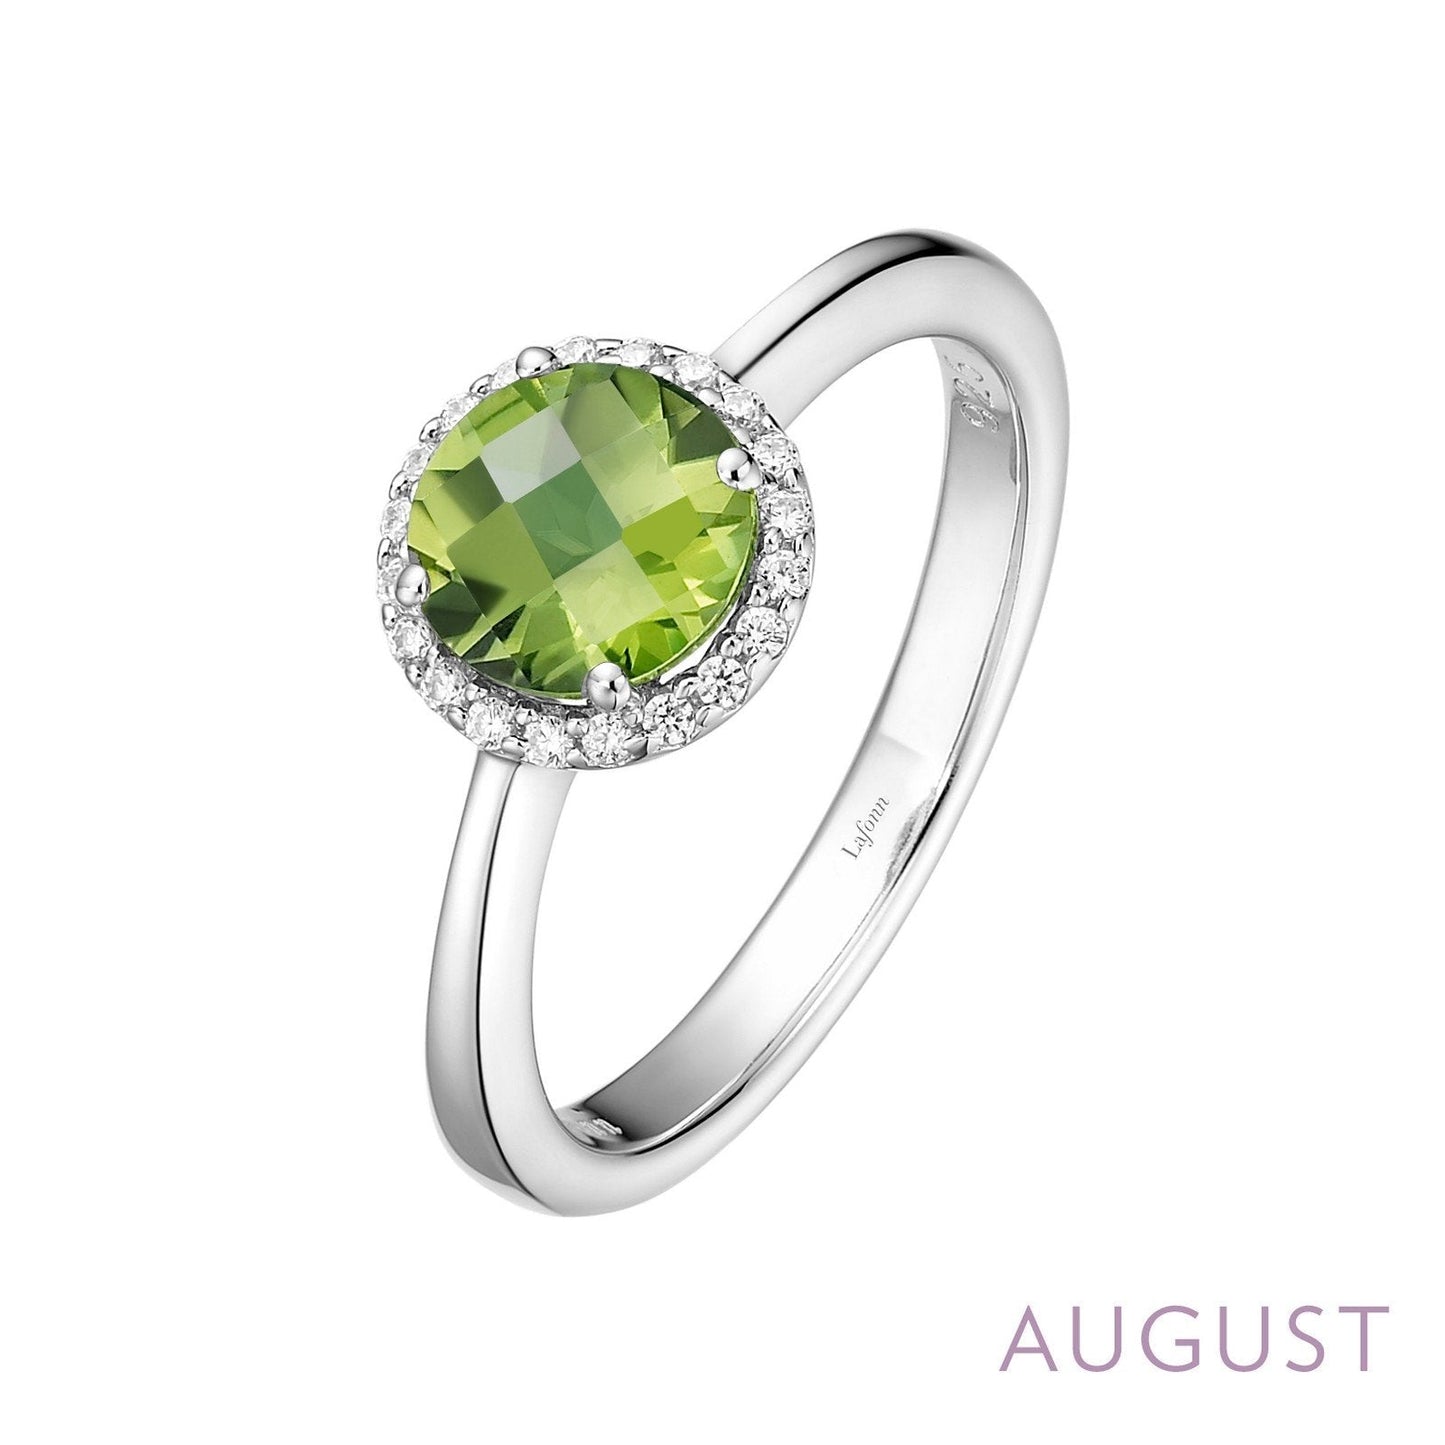 LaFonn Platinum AUGUST  6.00mm Round, Peridot, Approx. 0.85 CTW RINGS August Birthstone Ring